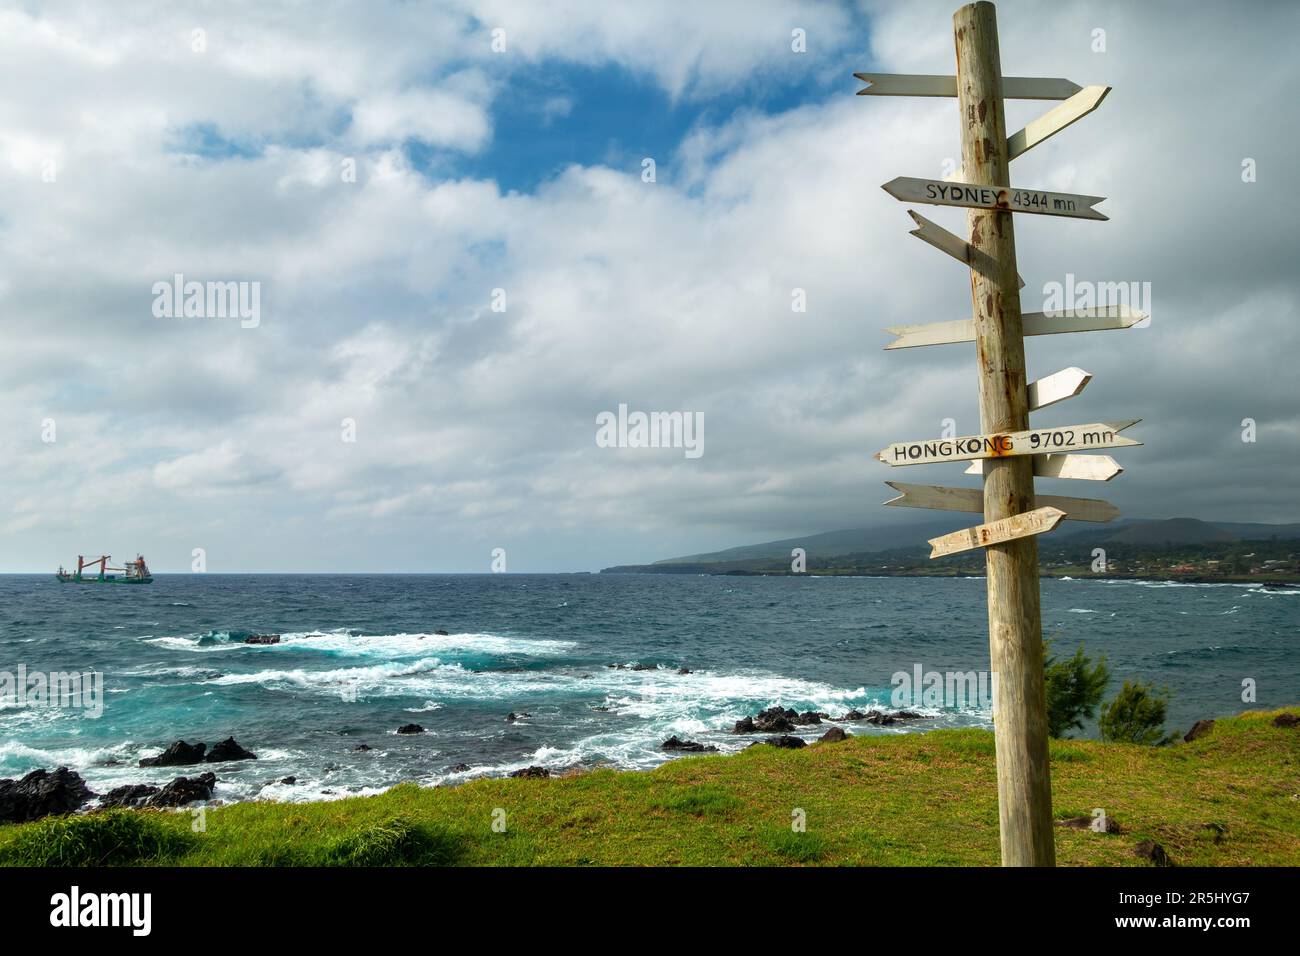 Wooden Post with Direction Signs at Hanga Roa Waterfront.  Easter Island Chile Pacific Ocean Coastline, Stormy Skyline, Distant Cargo Ship on Horizon Stock Photo